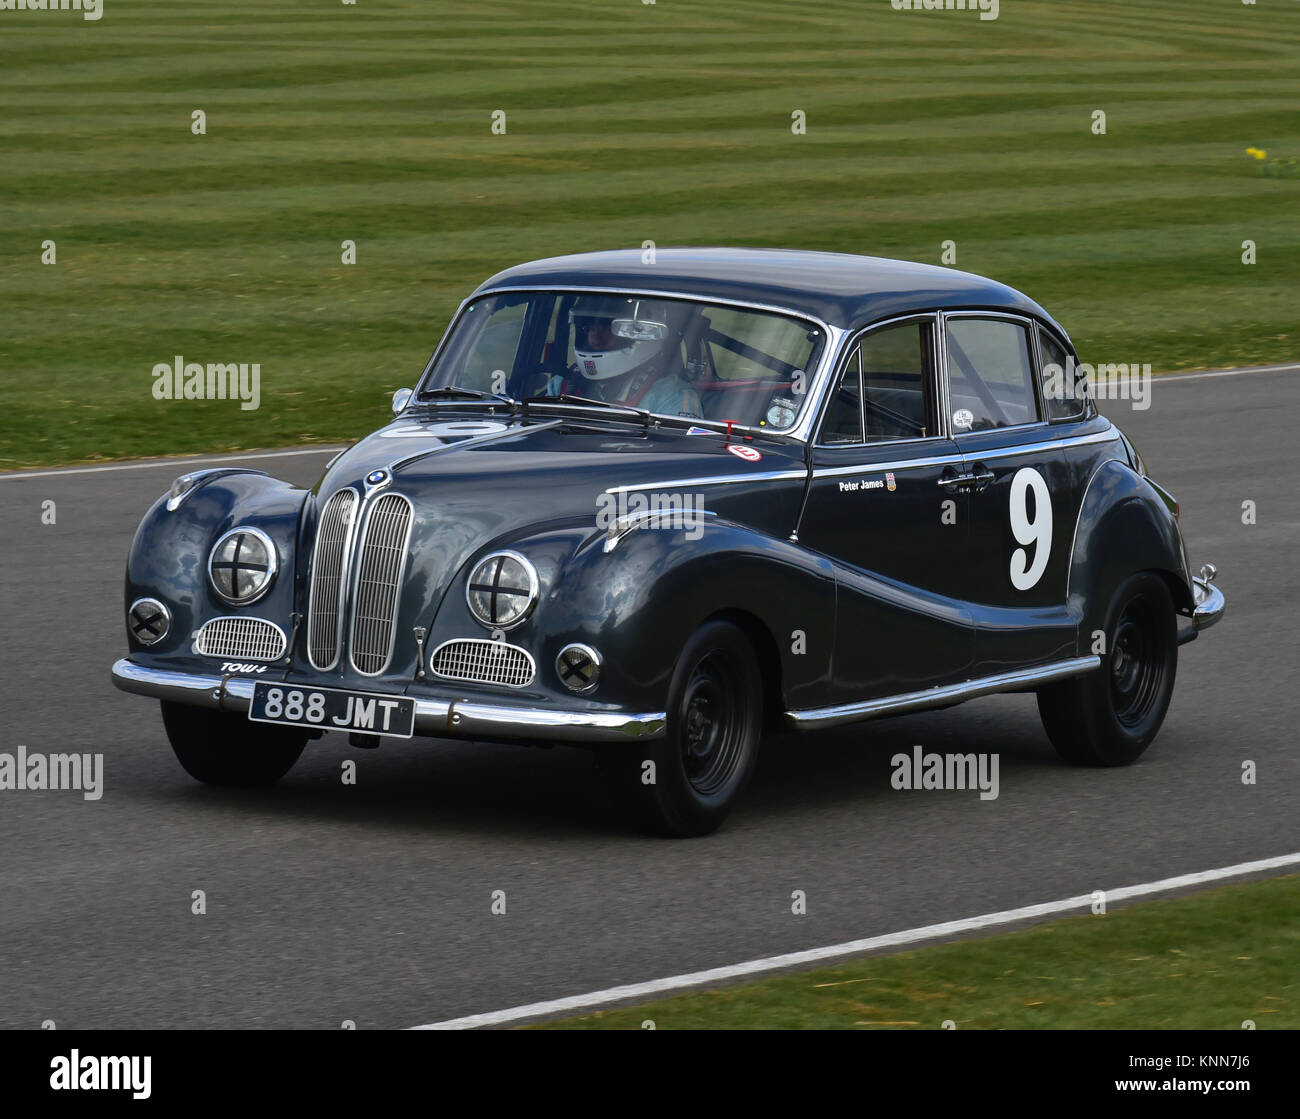 Peter James, BMW 502 V8, 888 JMT, Sopwith Cup, Goodwood 73rd MM March 2015, 73rd, 73rd Members Meeting, Chris McEvoy, CJM Photography, classic cars, E Stock Photo